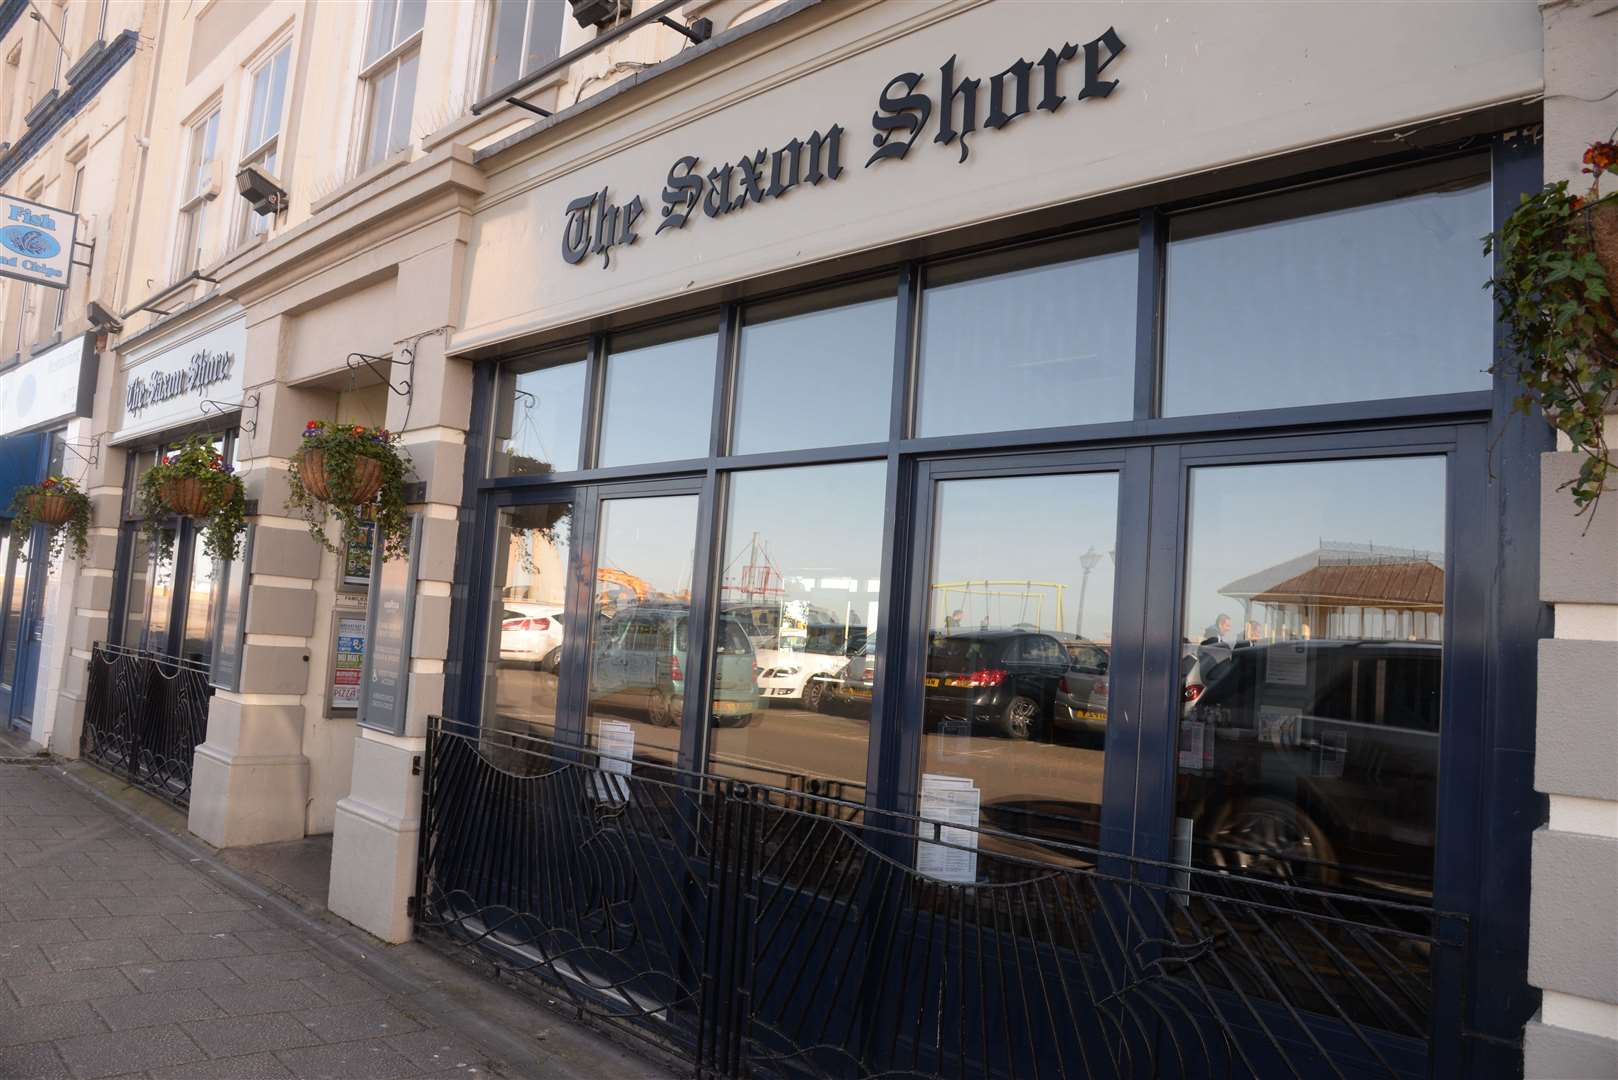 Wetherspoon bosses have binned plans to build a hotel at The Saxon Shore pub in Herne Bay